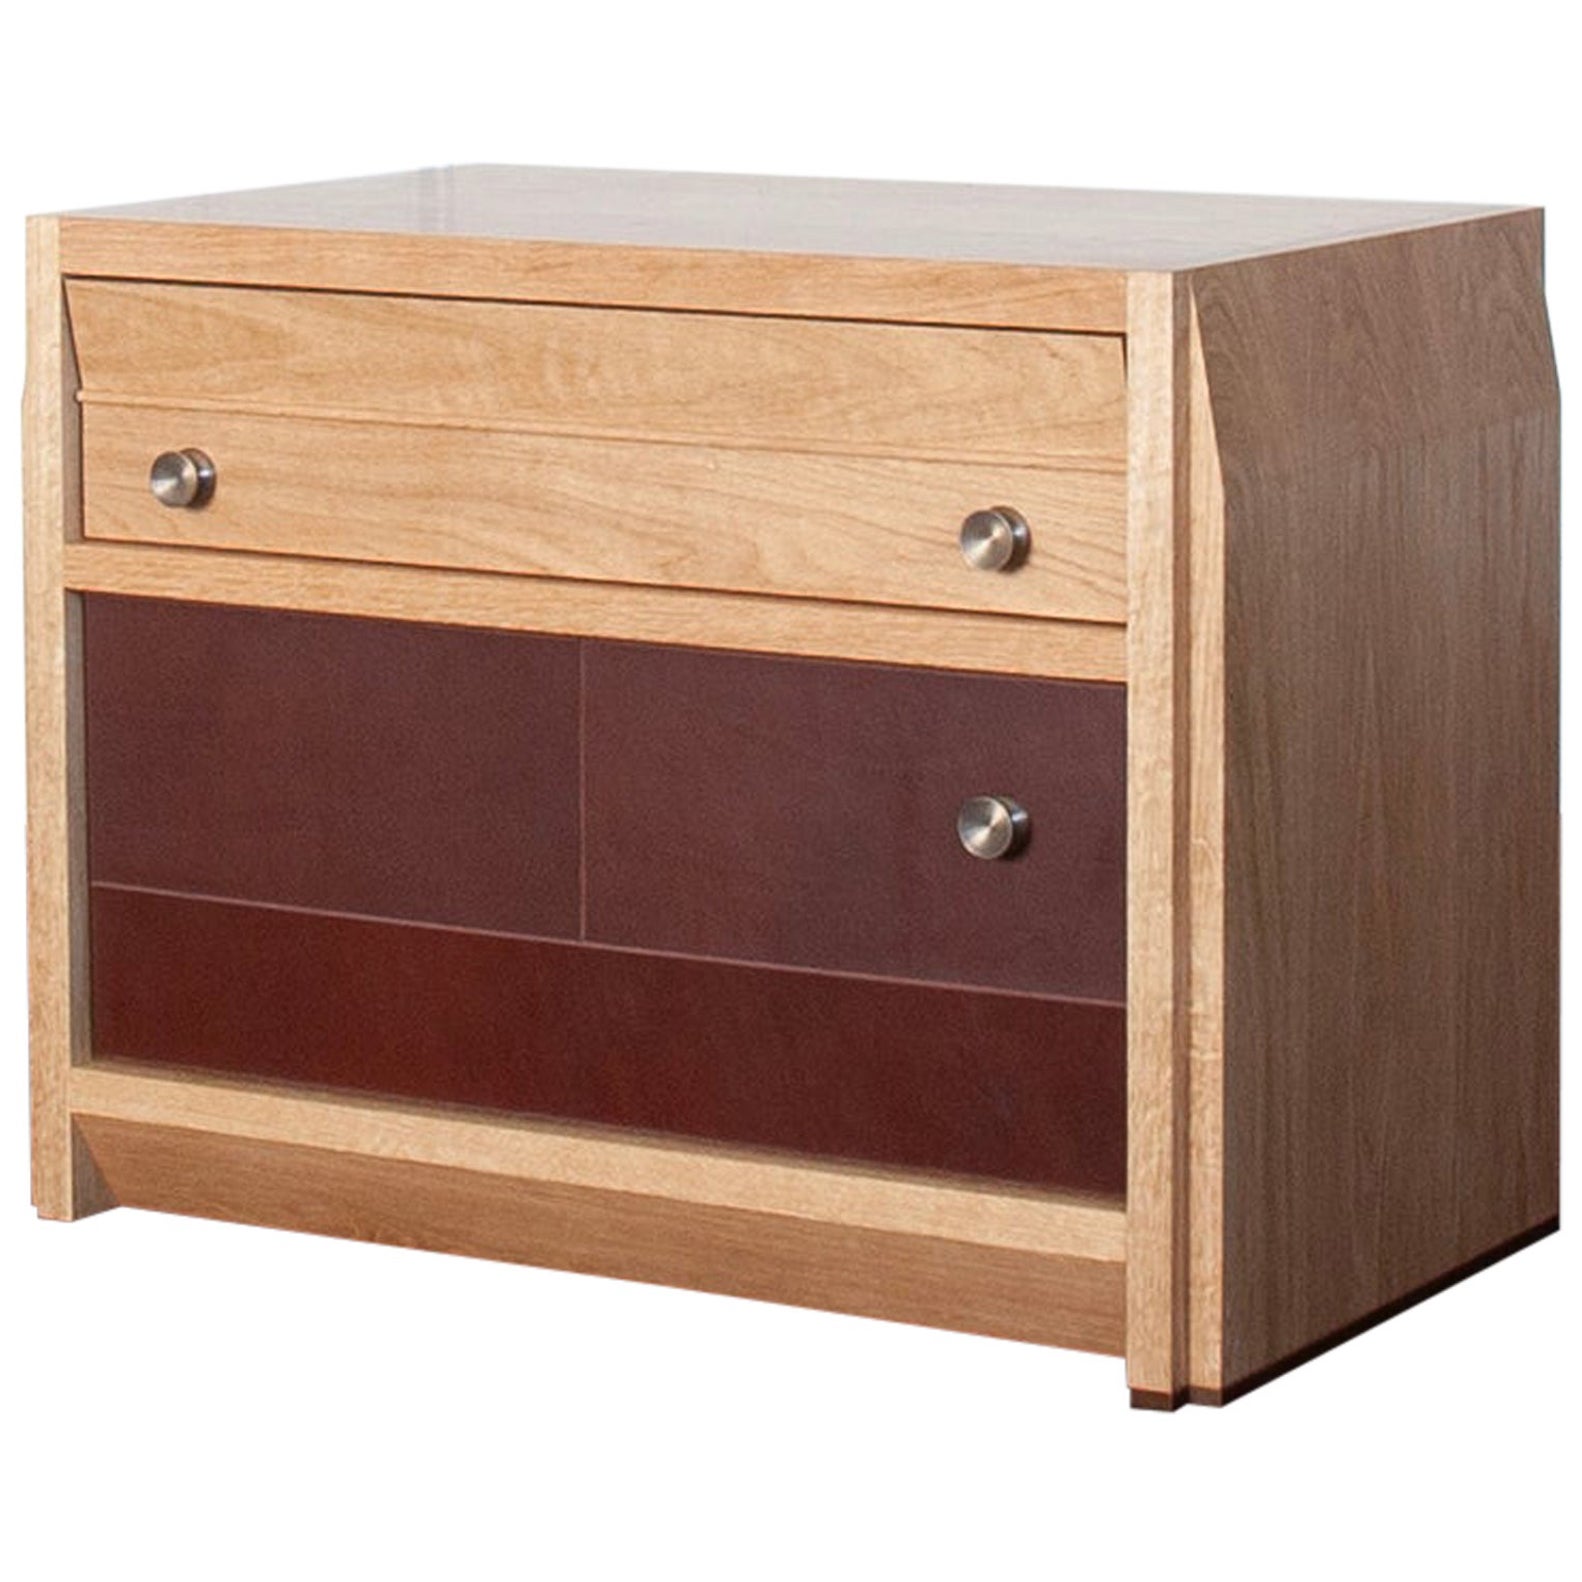 READY TO SHIP Octavia nightstands by Crump and Kwash / White oak and Leather  For Sale